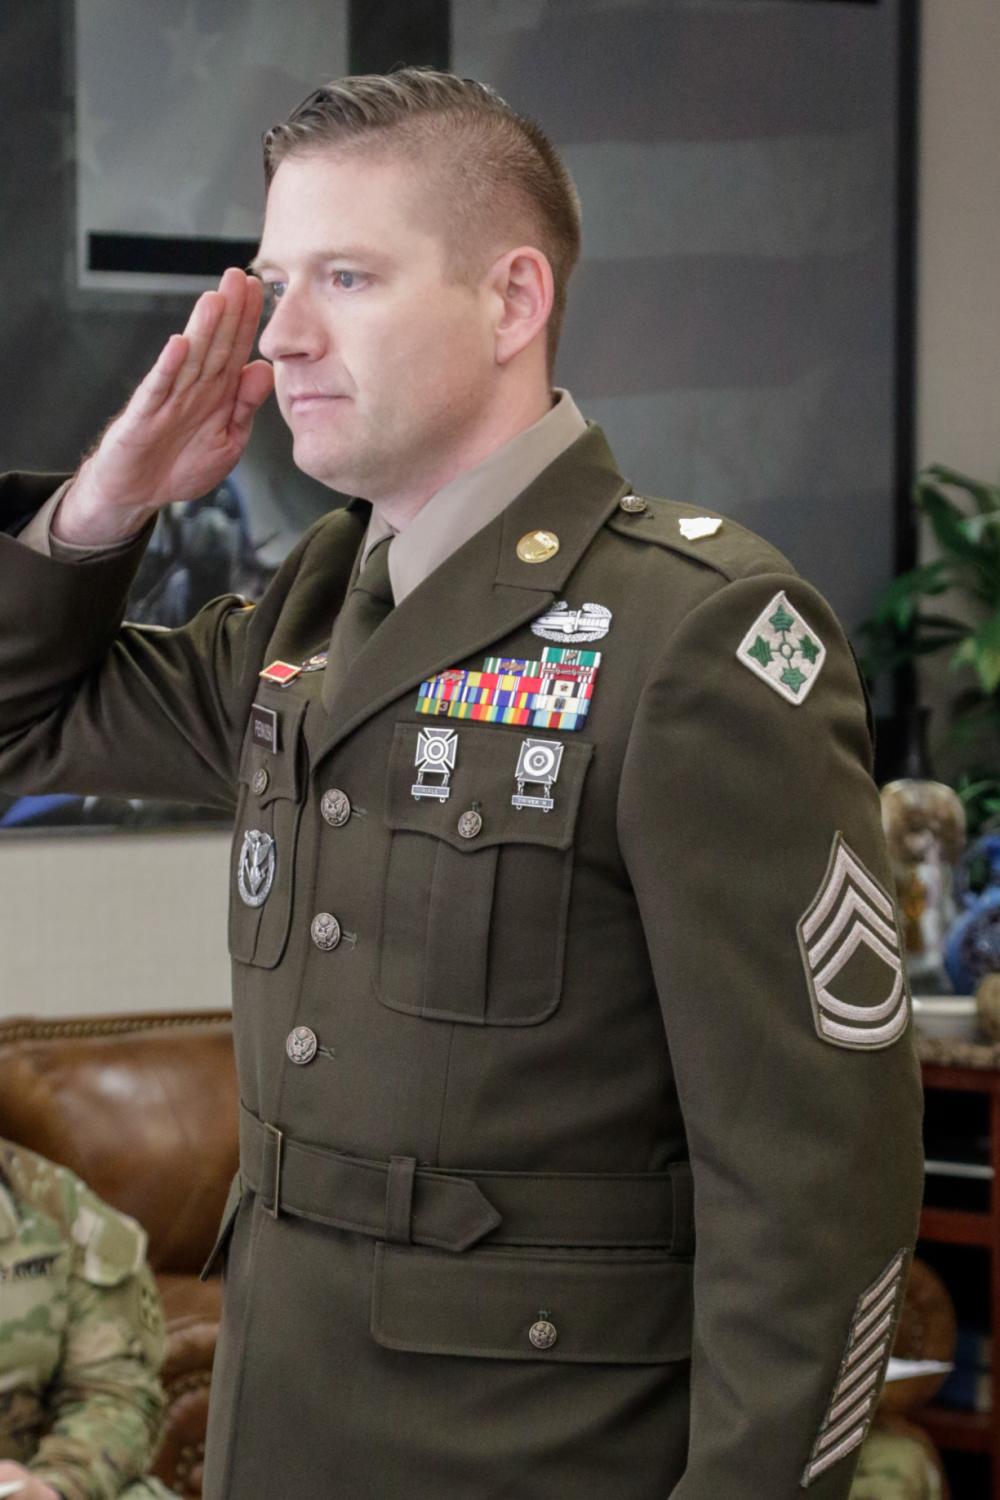 III Armored Corps Career Counselor of the Year